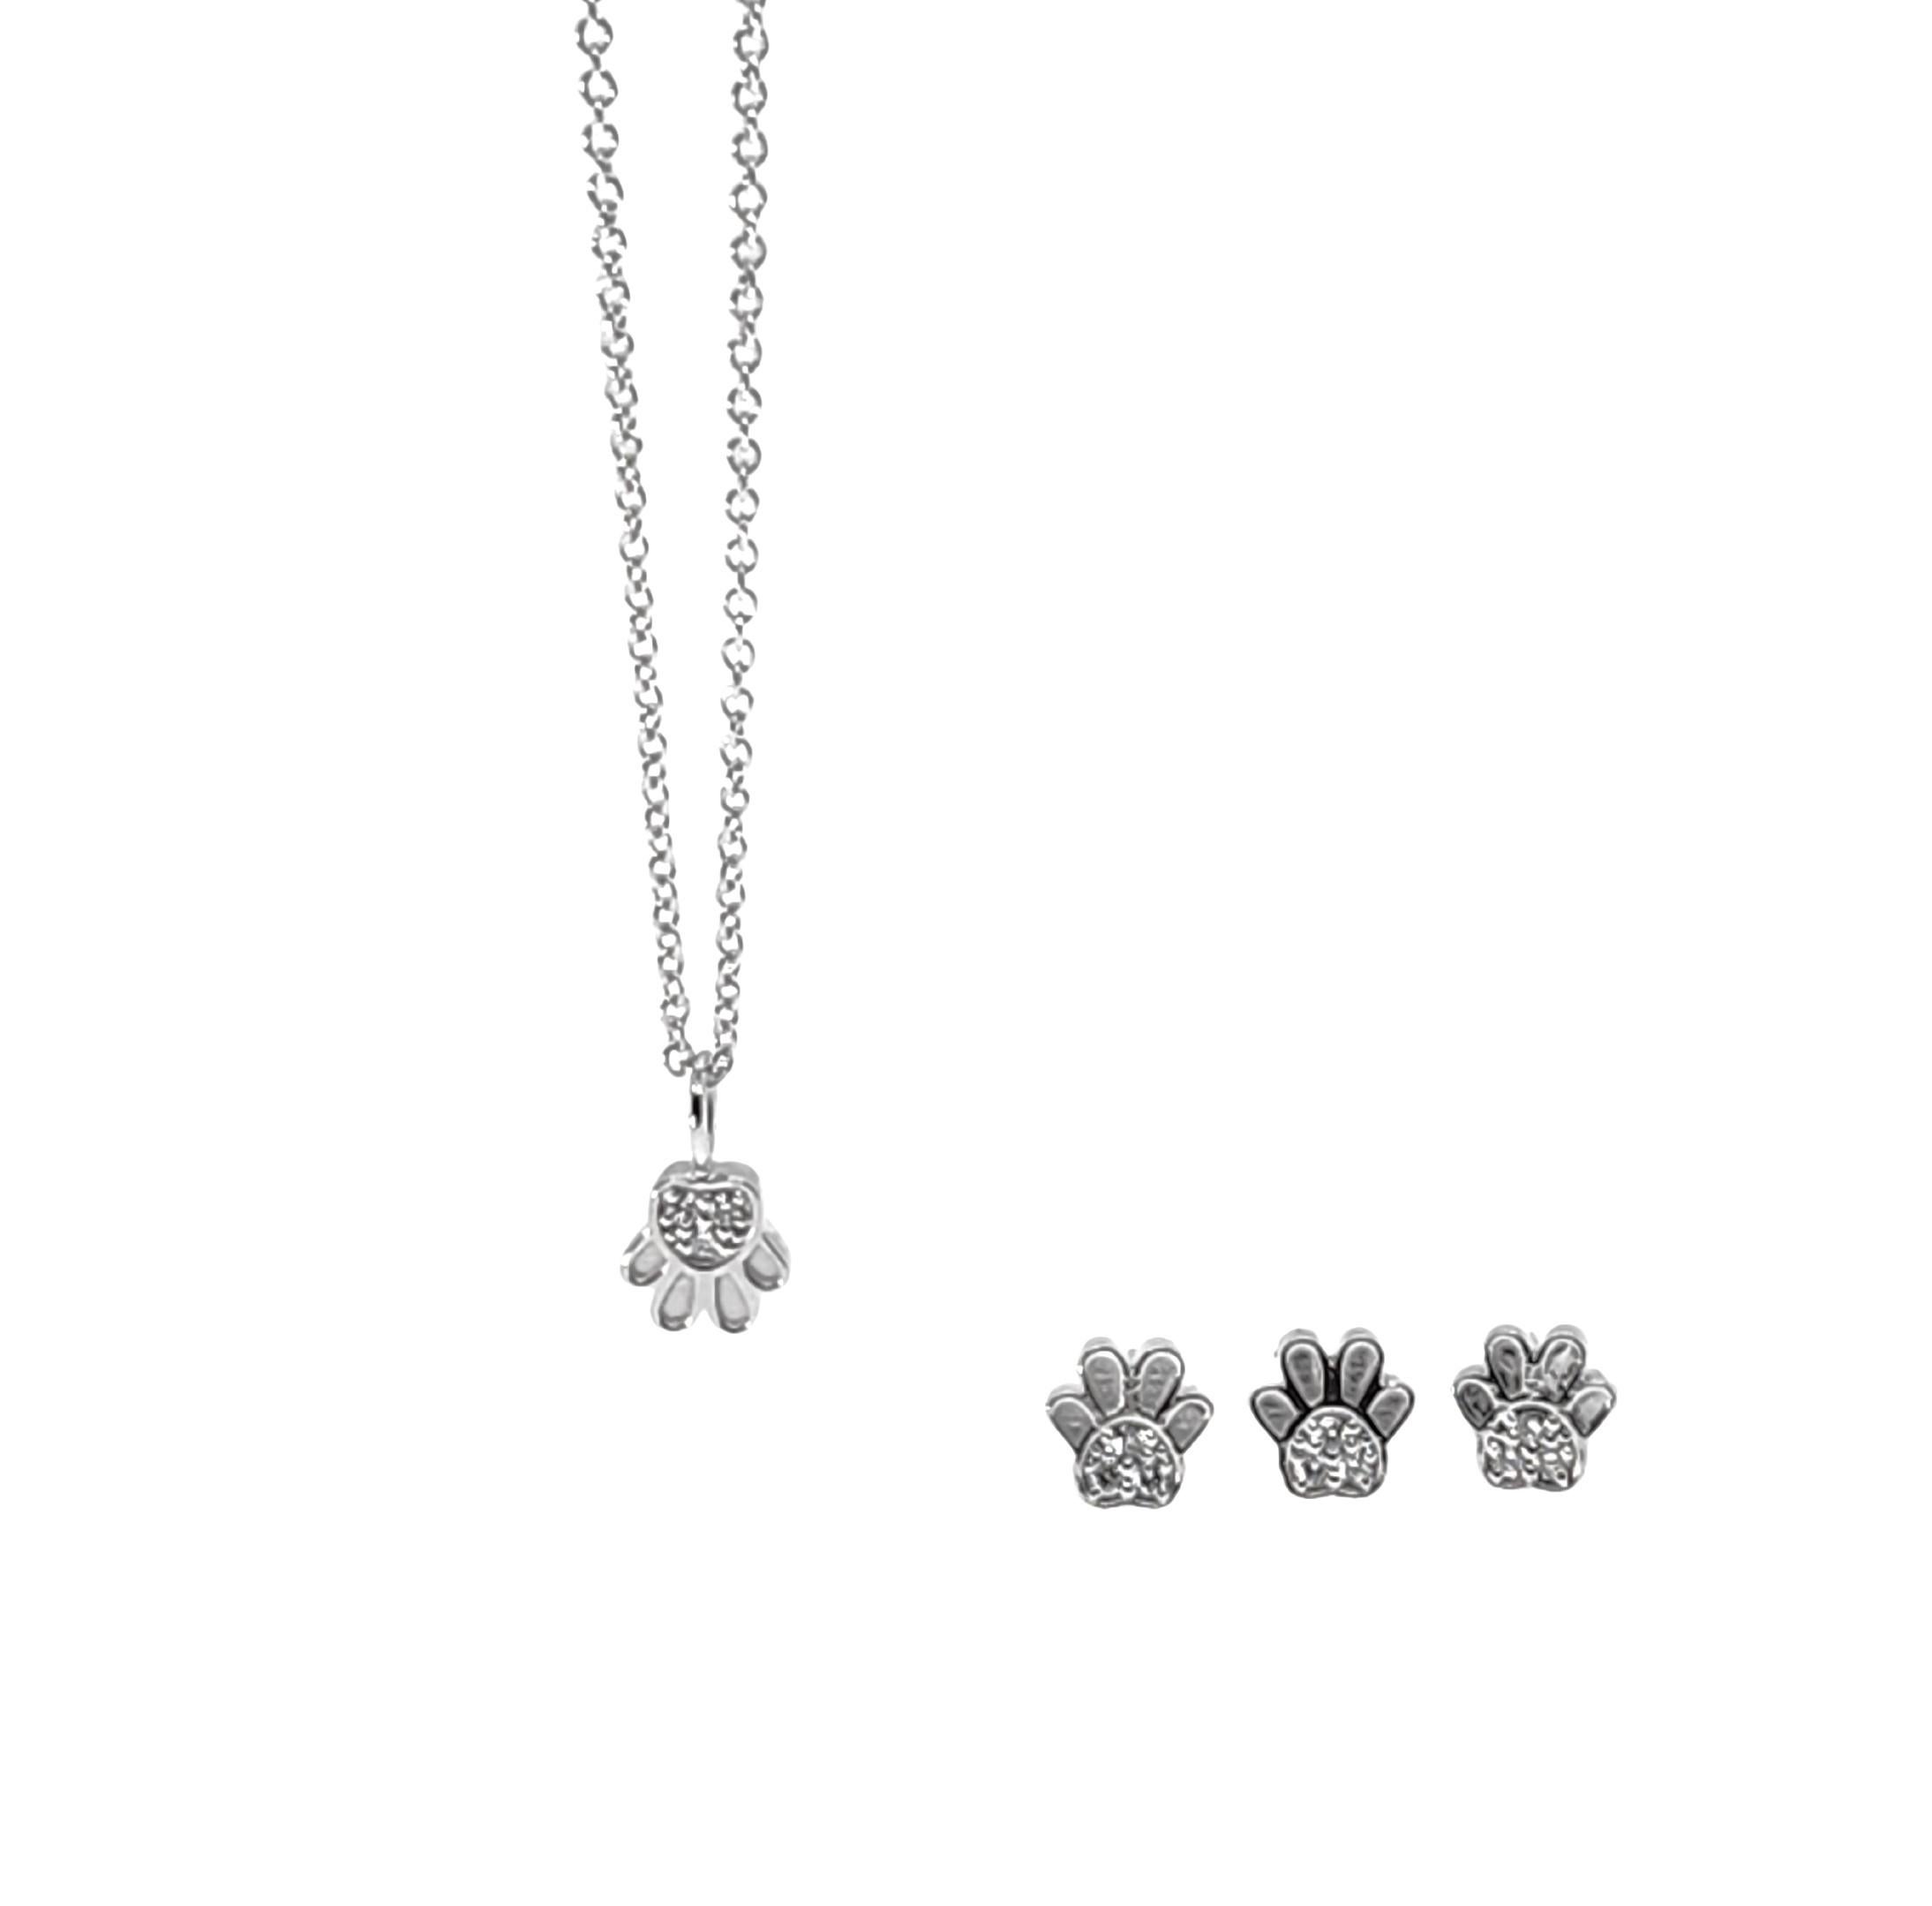 Contemporary Companion Petite Paw Print Charm Necklace in 14K White Gold and Diamonds For Sale